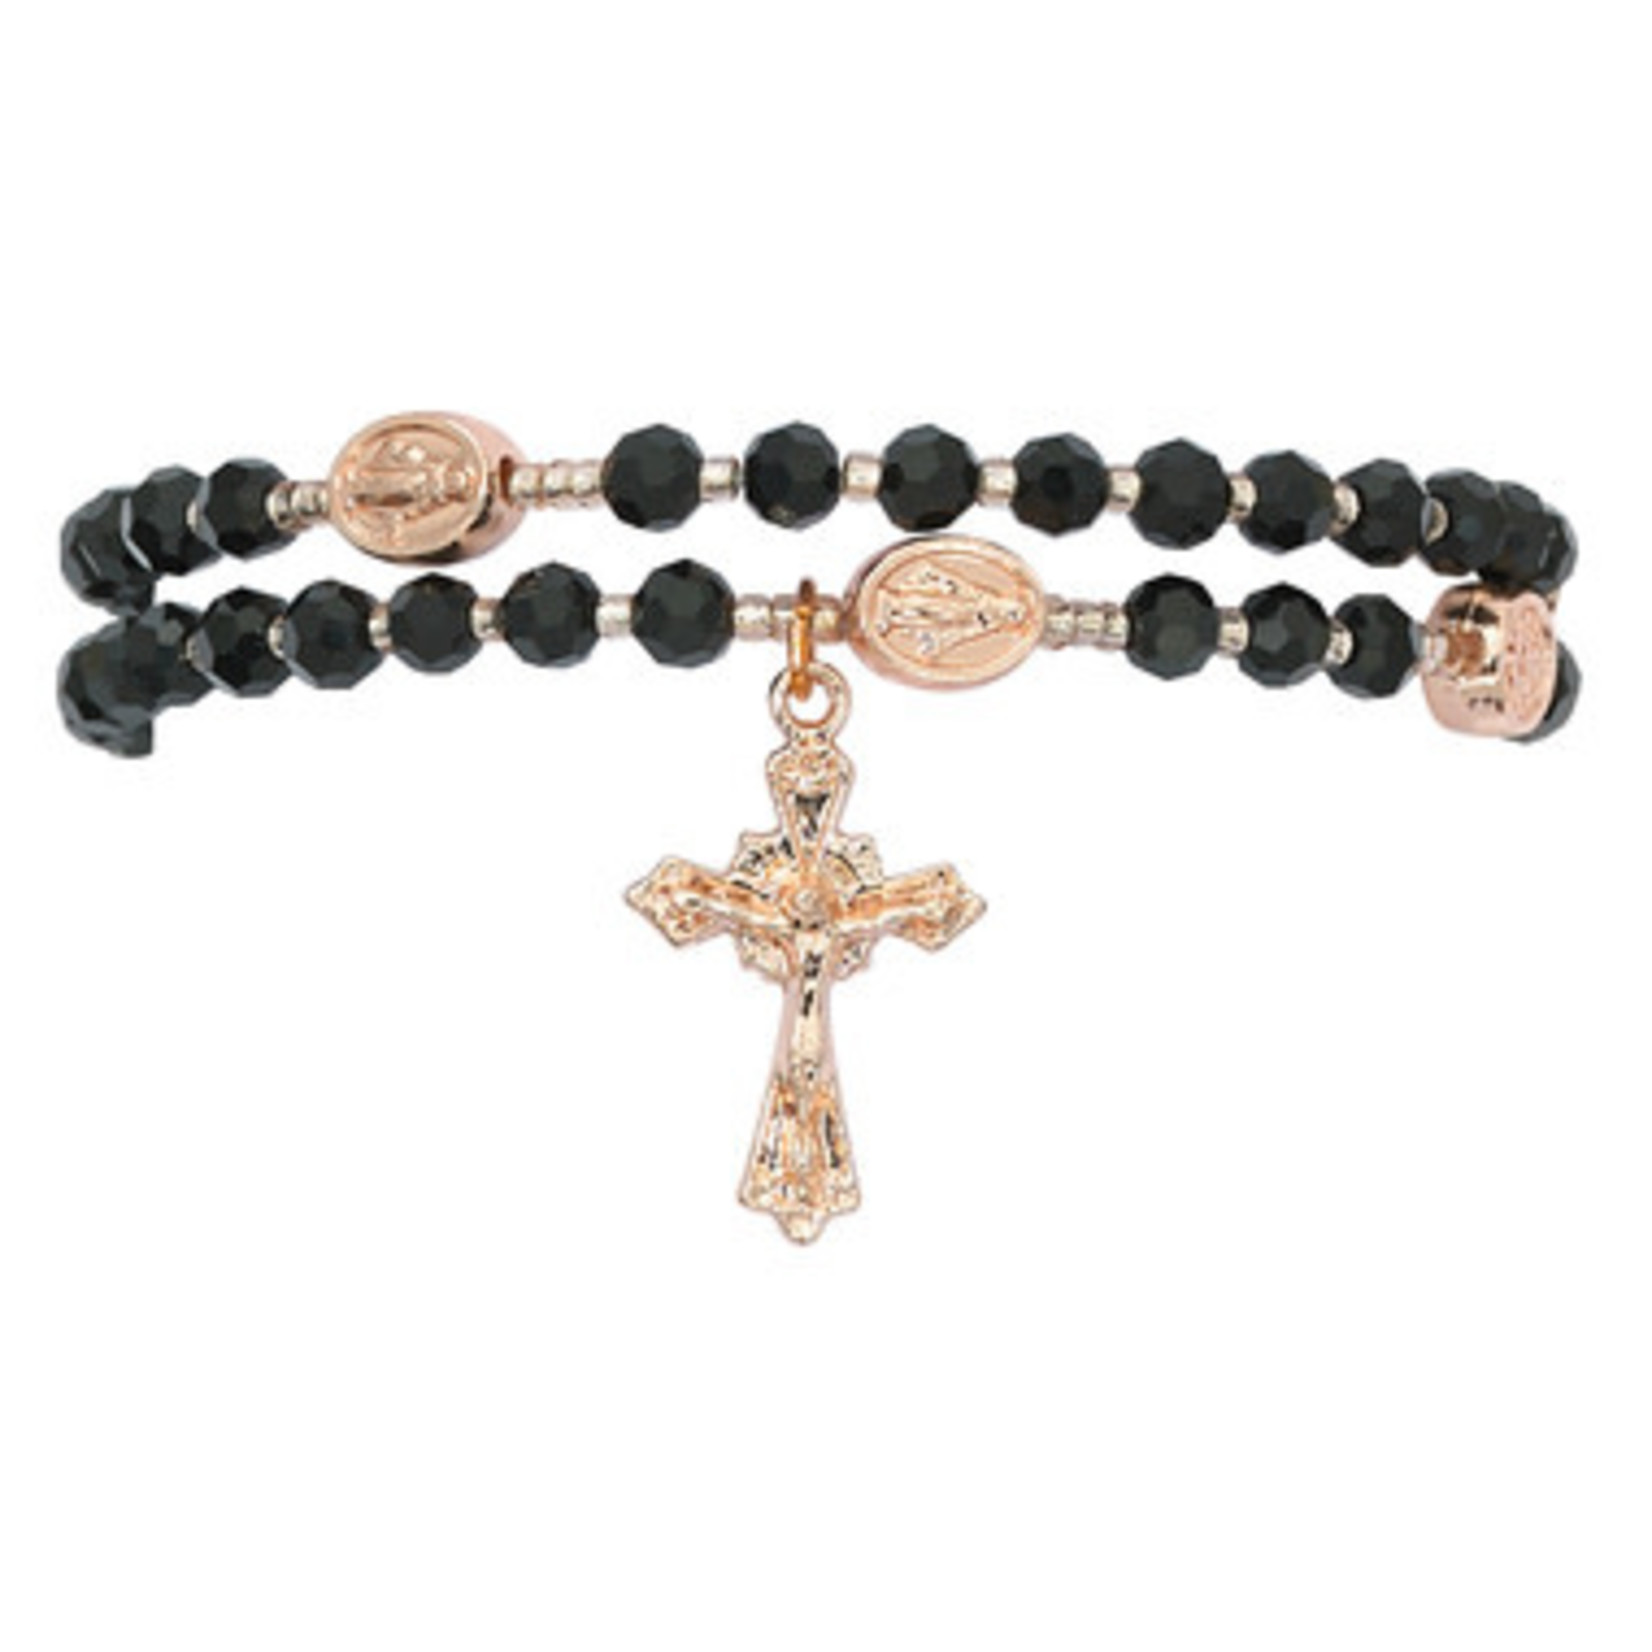 Black and Copper Twistable Rosary Bracelet